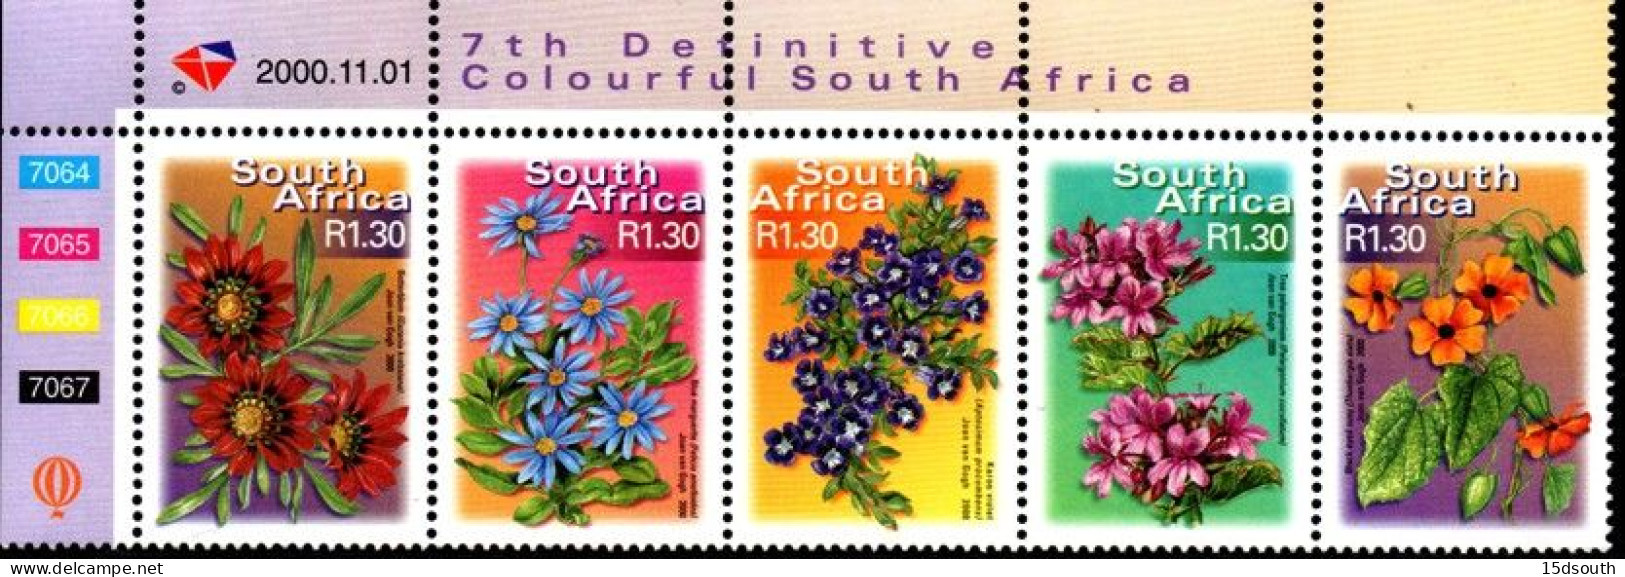 South Africa - 2000 7th Definitive Fauna And Flora R1.30 Control Block (**) (2000.11.01) - Blocks & Sheetlets